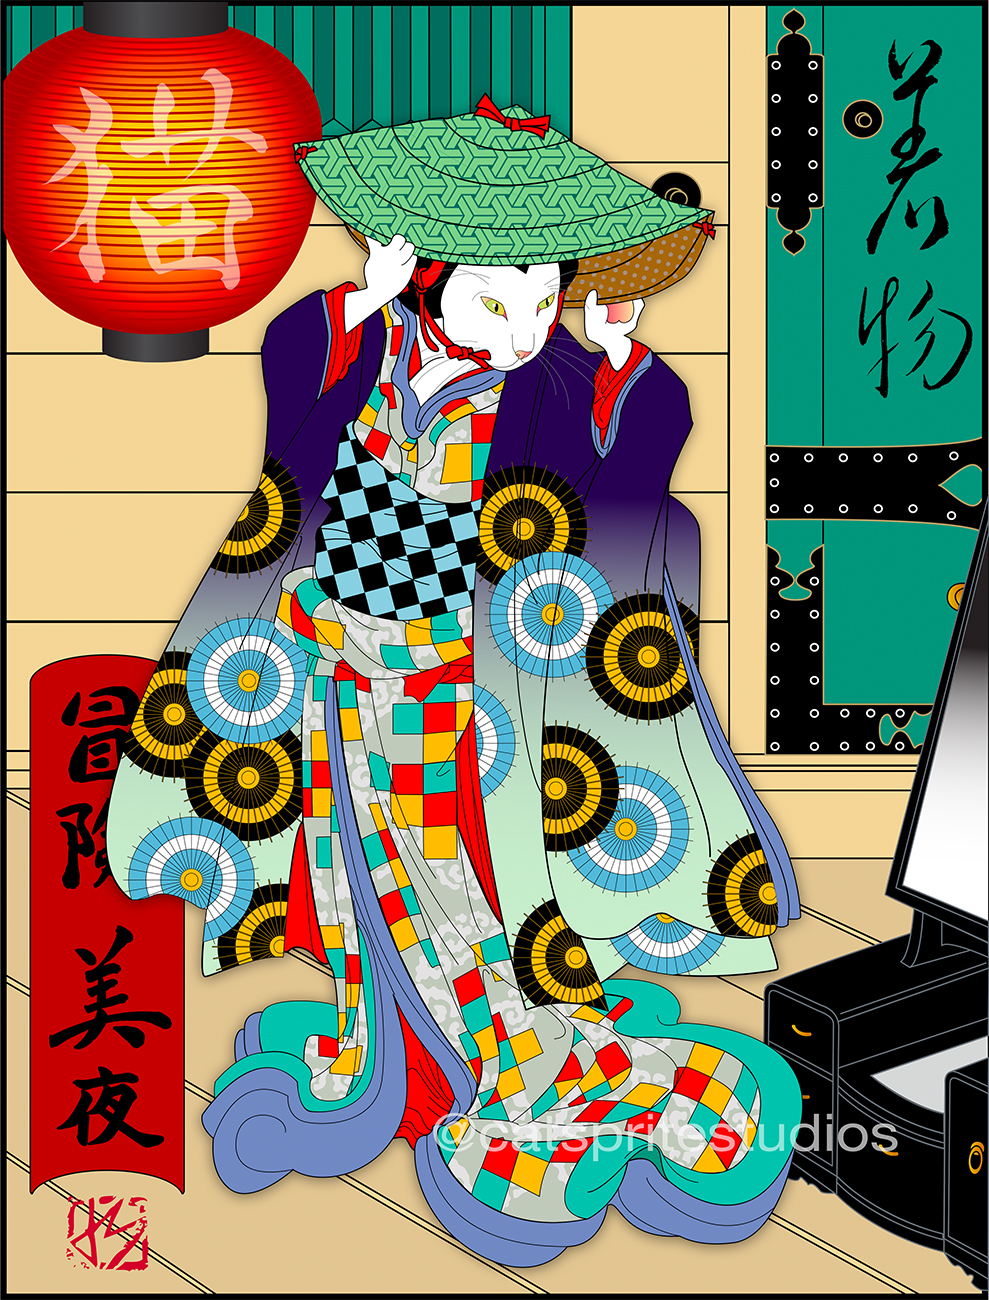 A stylish cat checks herself in the mirror before a late-night rendezvous. (After Utagawa Kuniyoshi)